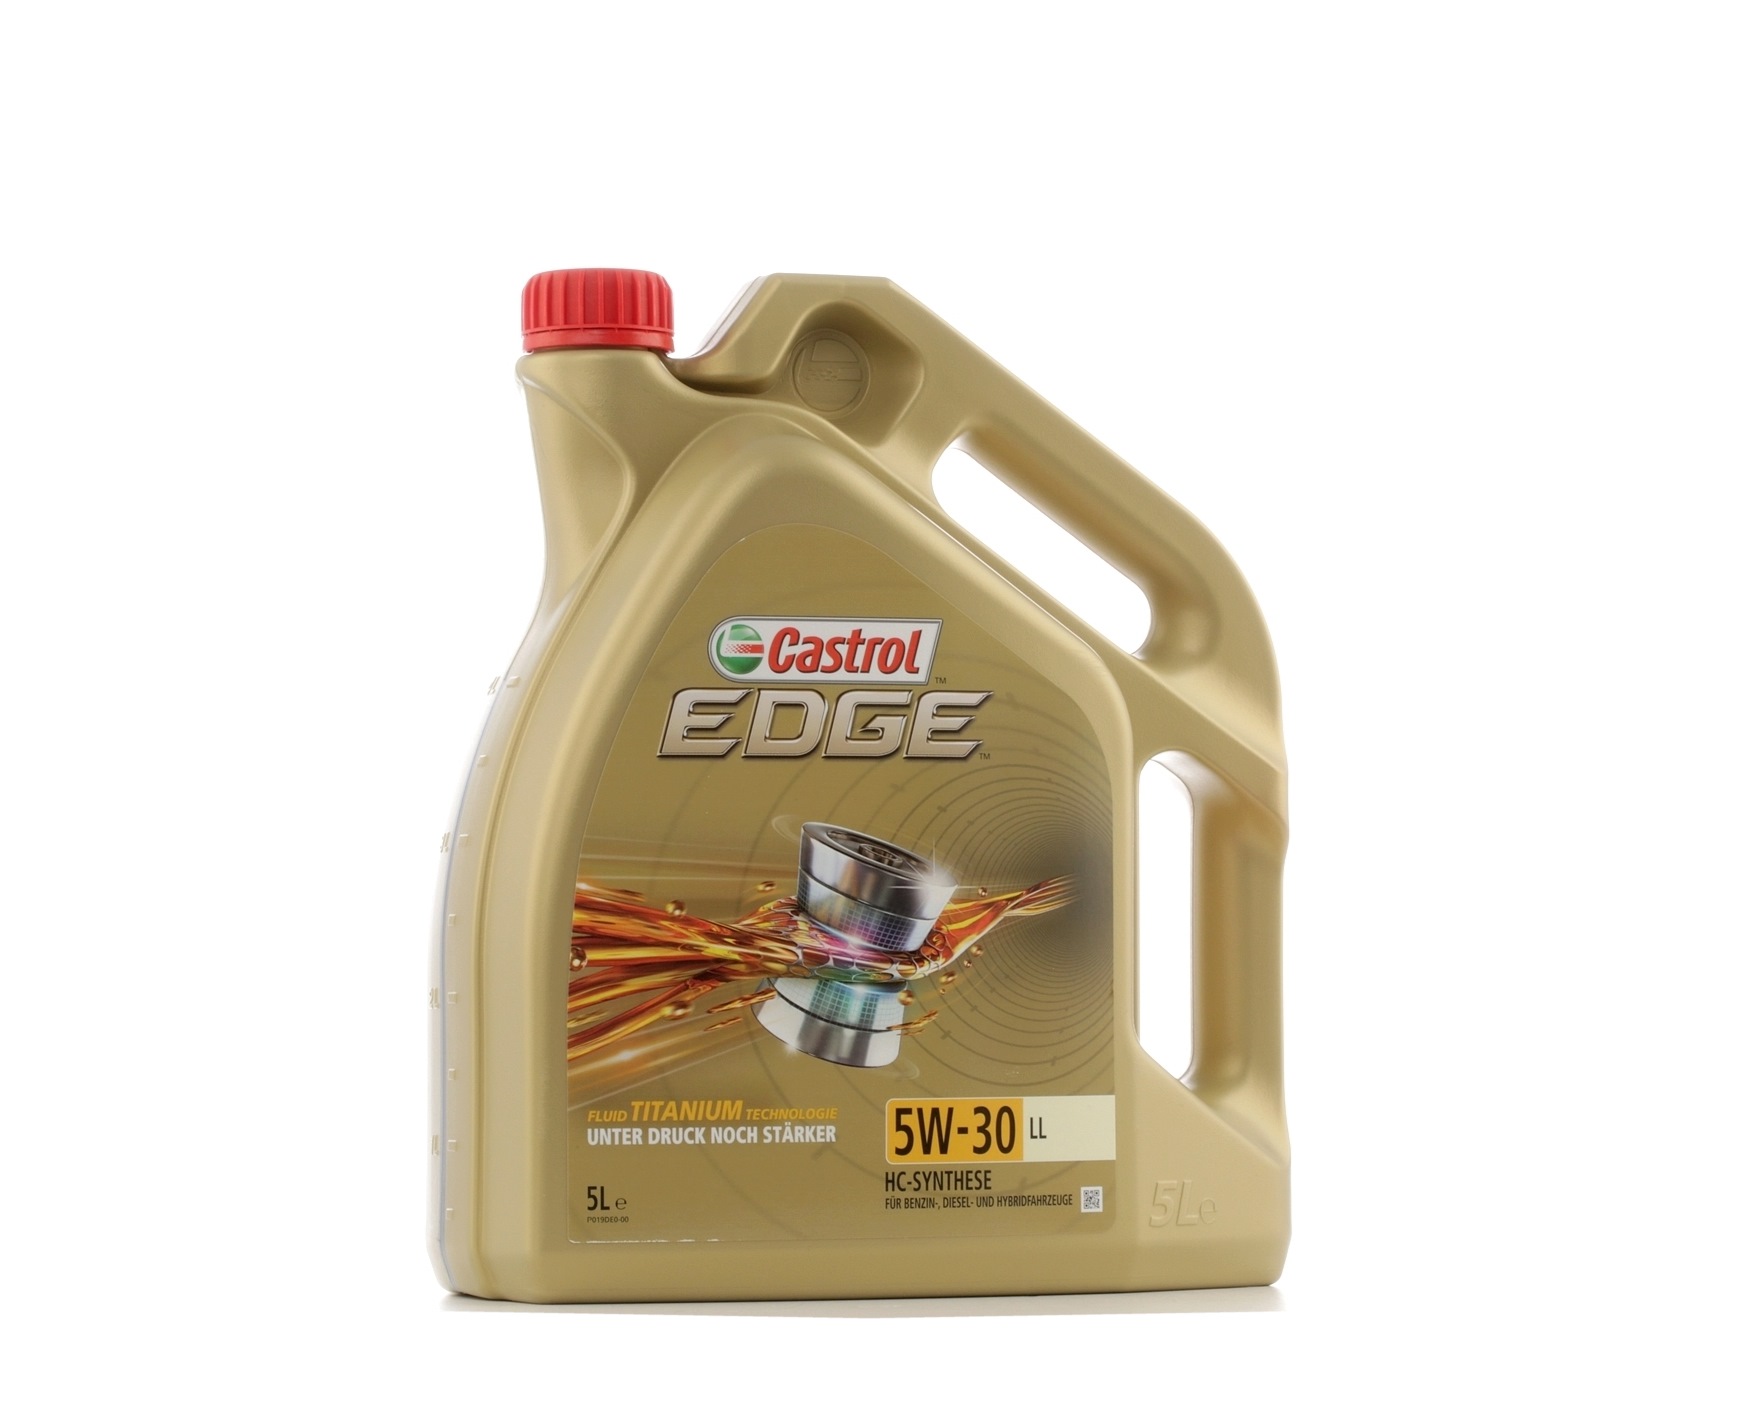 CASTROL EDGE, LL 15669E Olie 5W-30, 5L, Synthetische olie